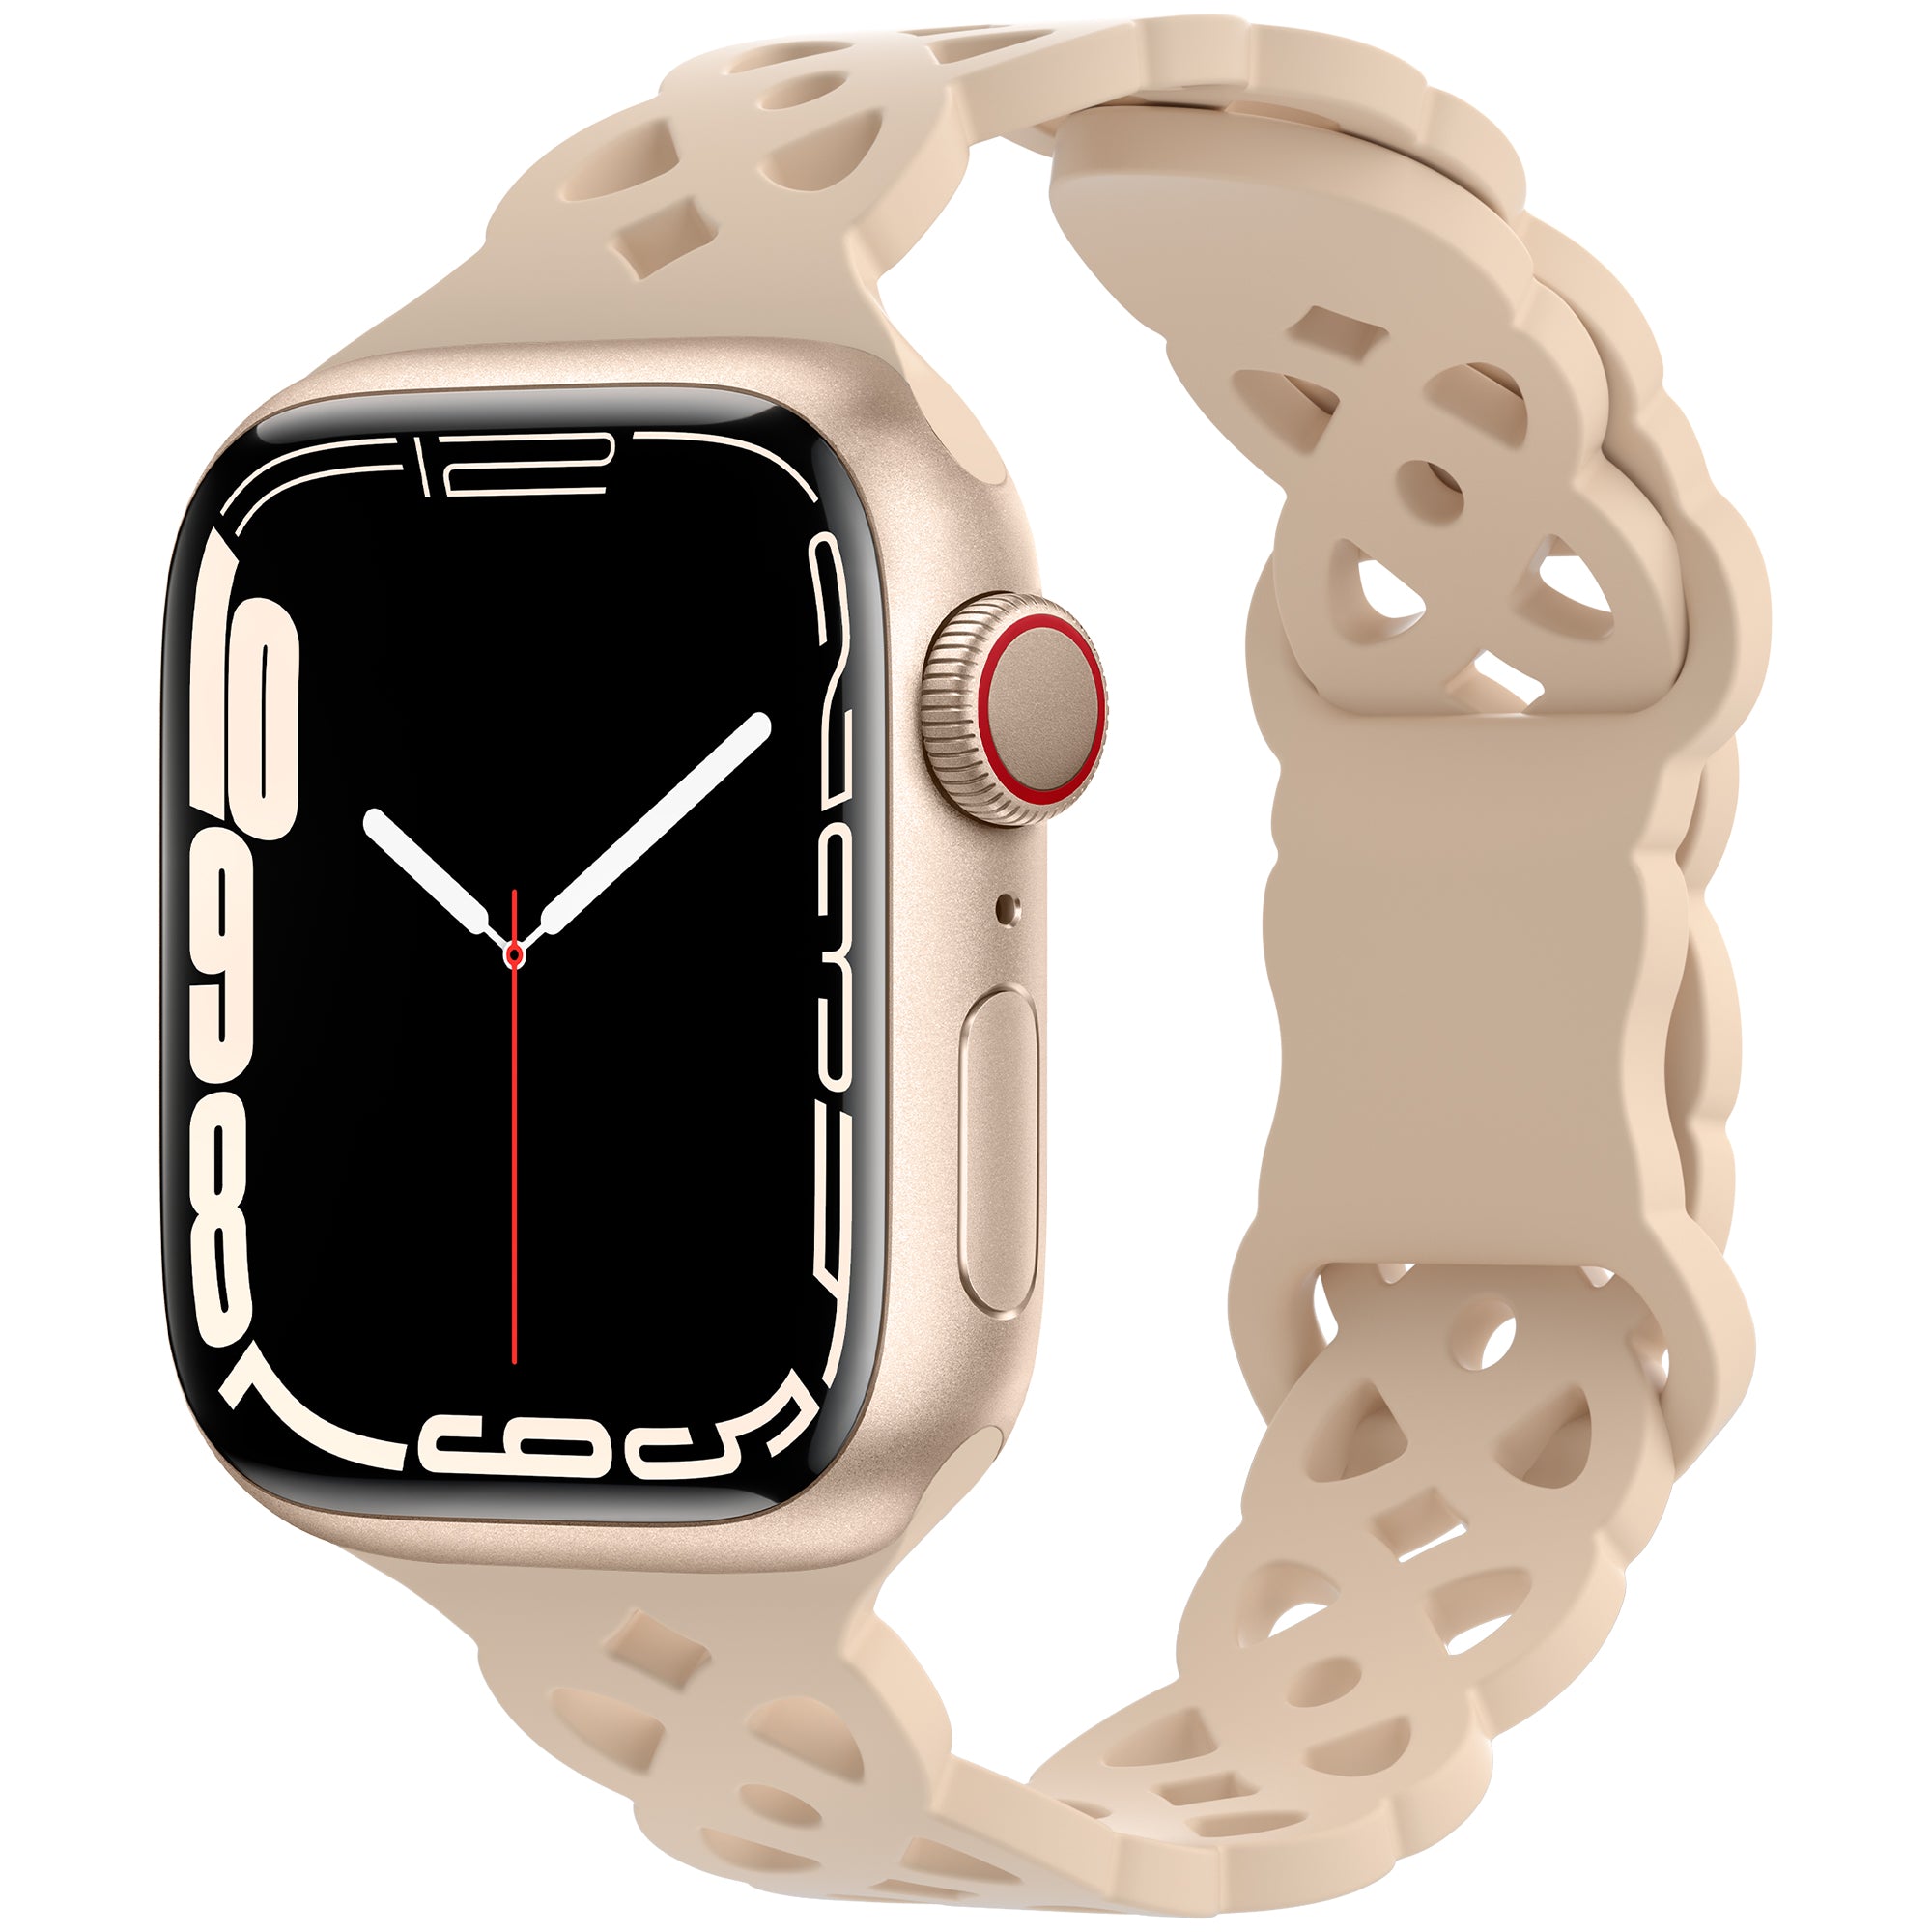 Braided Bliss Silicone Band For Apple Watch Multiple Colors Available